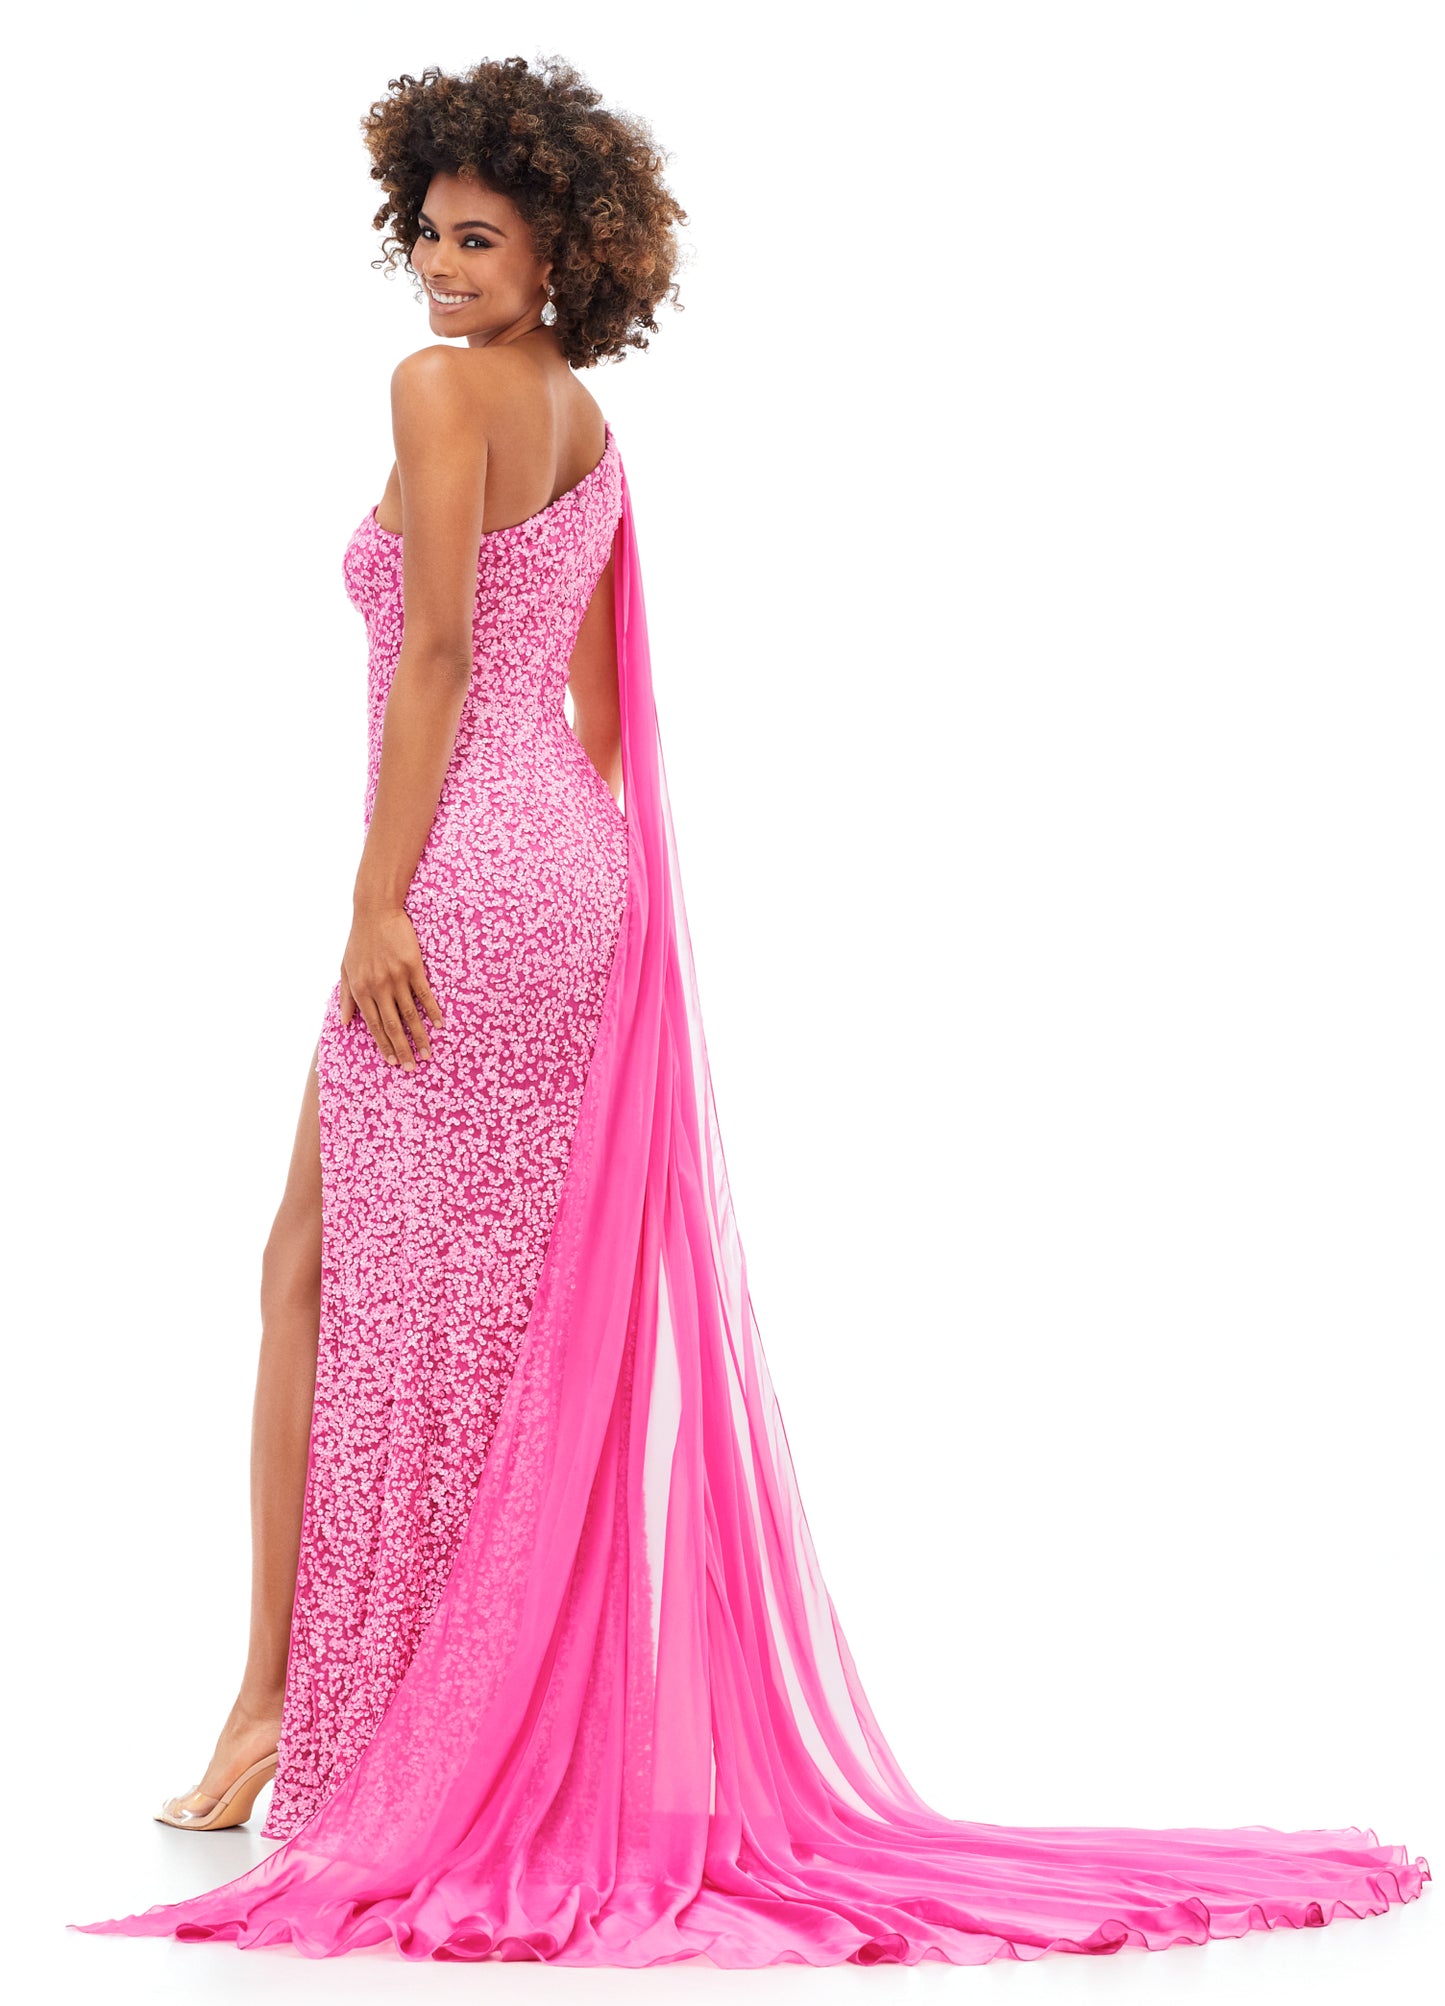 Ashley Lauren 11371 One Shoulder Prom Dress fully sequence with shoulder cape and slit.  Colors : Candy Pink, AB Turquoise, Coral, Emerald, Royal, Sky  Sizes: 0-24  One Shoulder Shoulder cape Slit Fully sequenced 